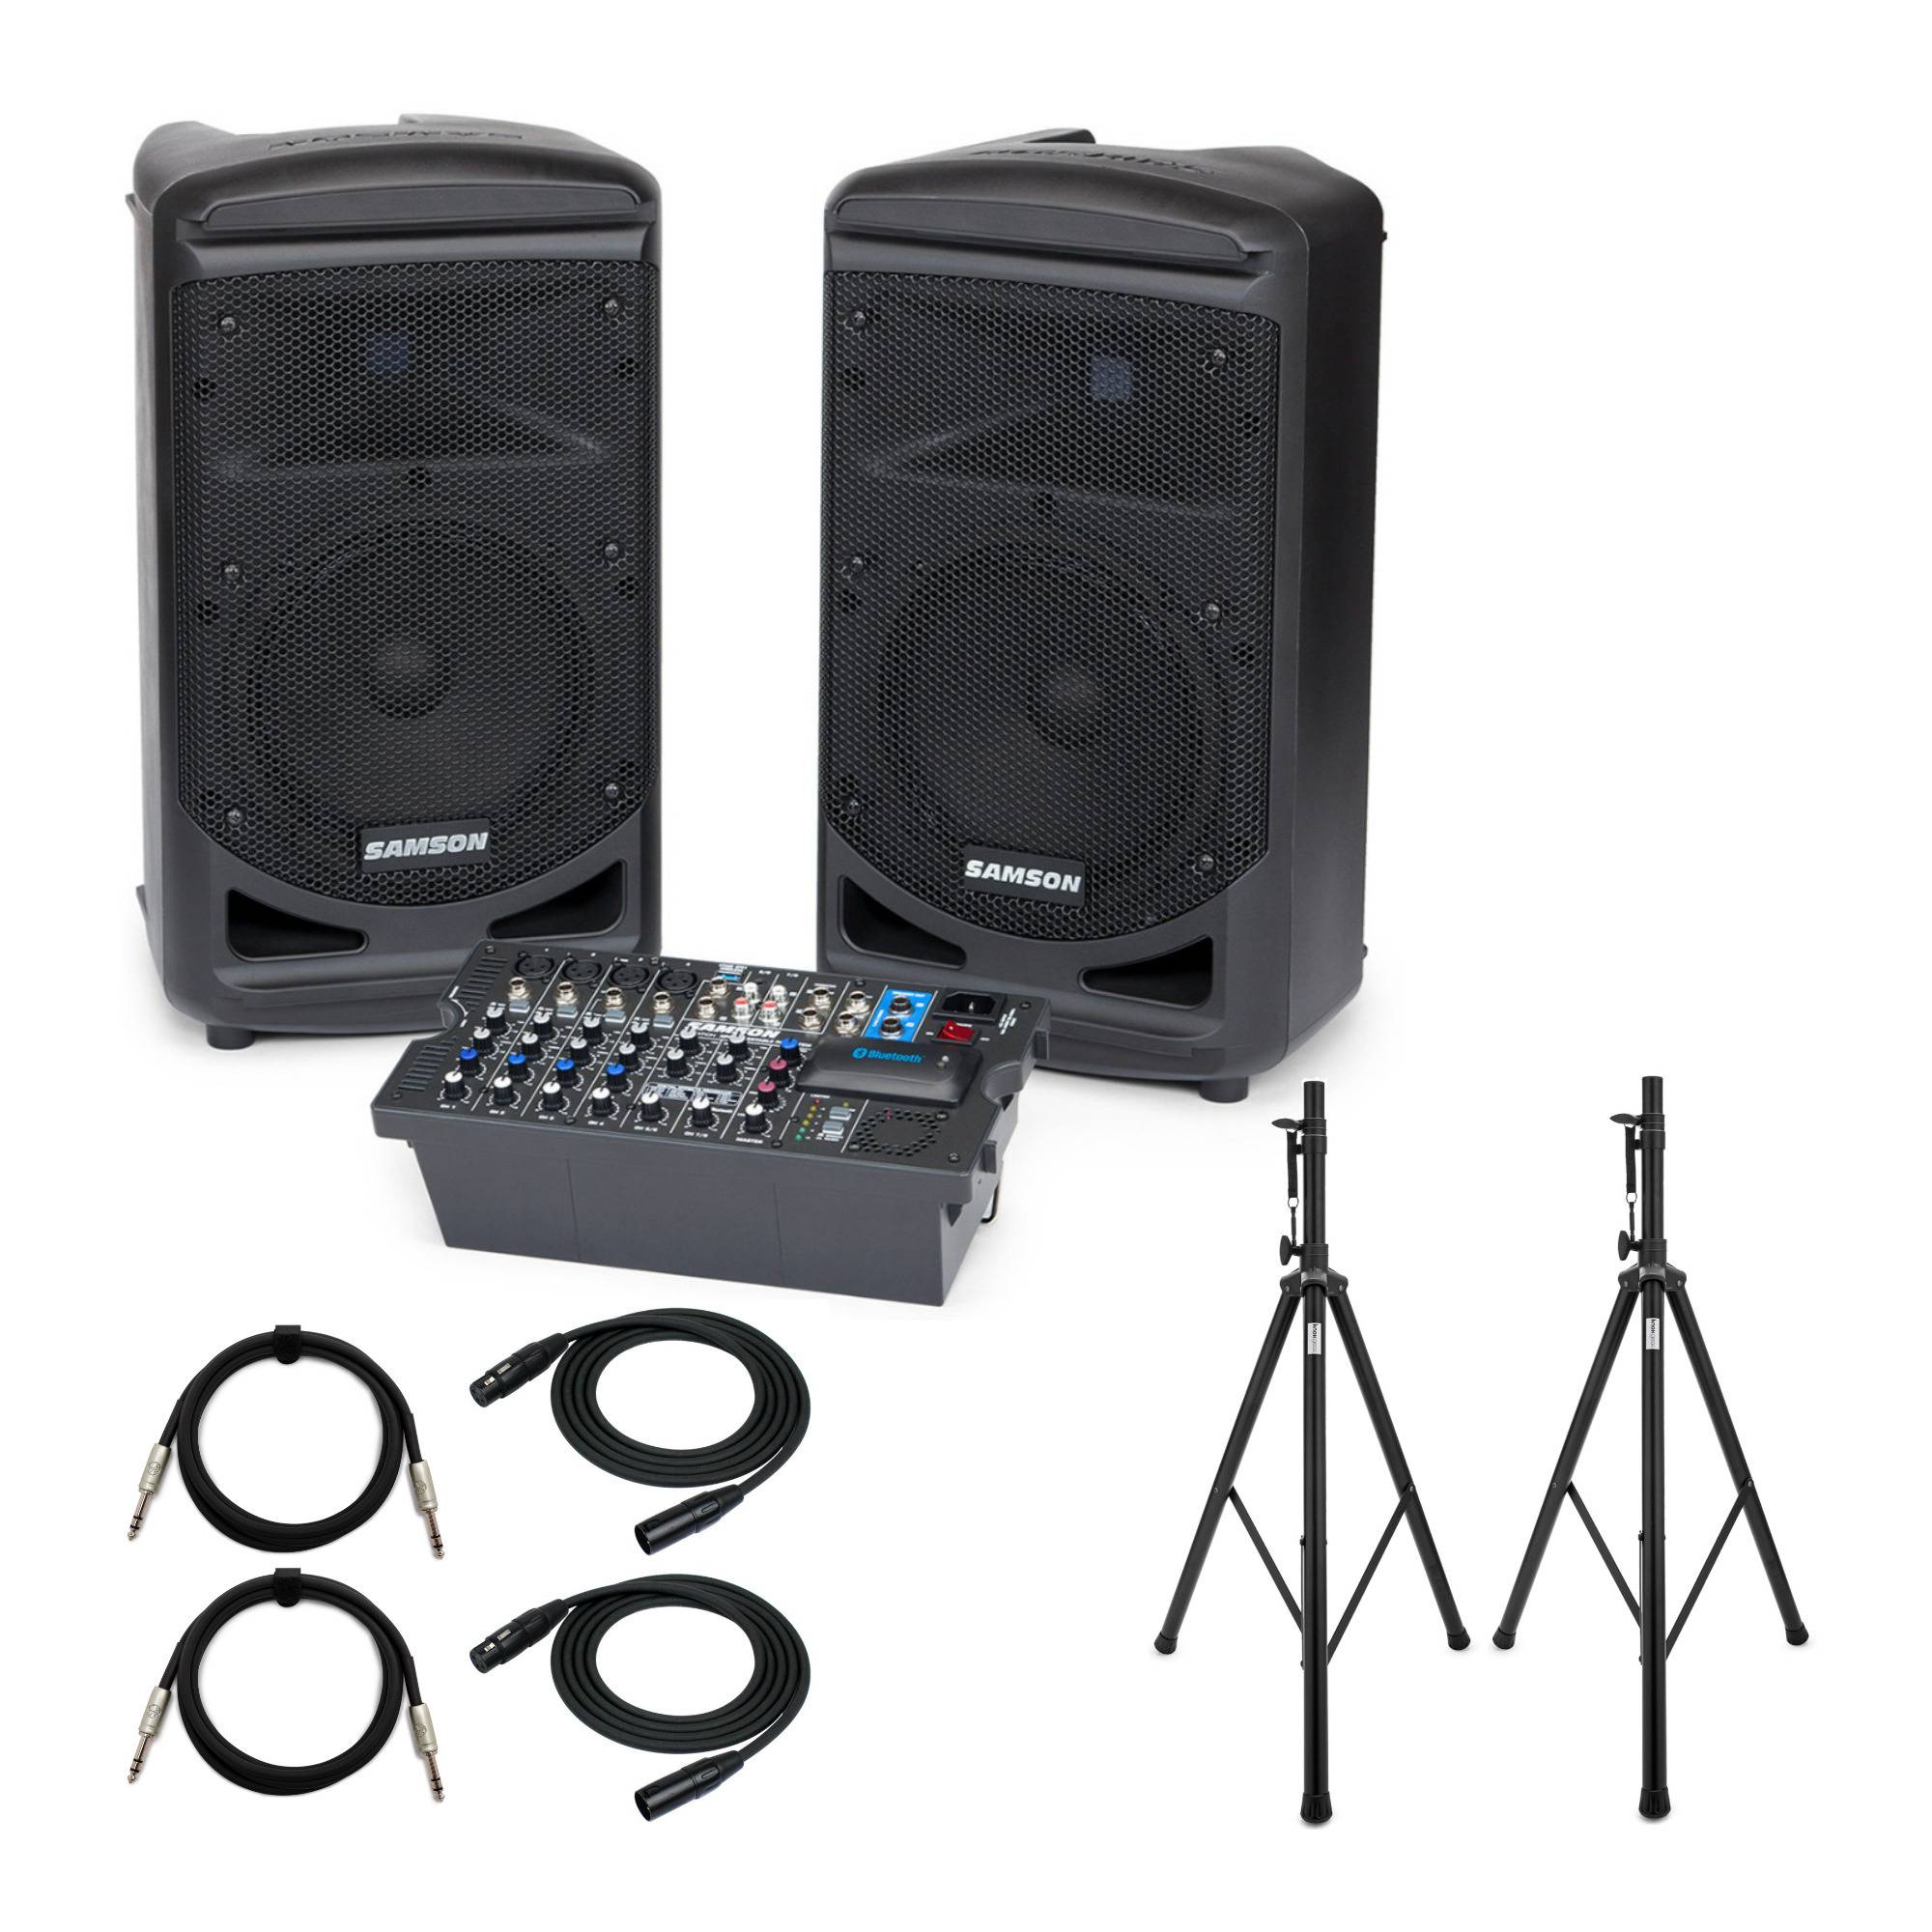 Samson Expedition XP800B 8-channel 800W Portable PA System with Stands, 2x25 XLR and 2x6 1/4 TRS